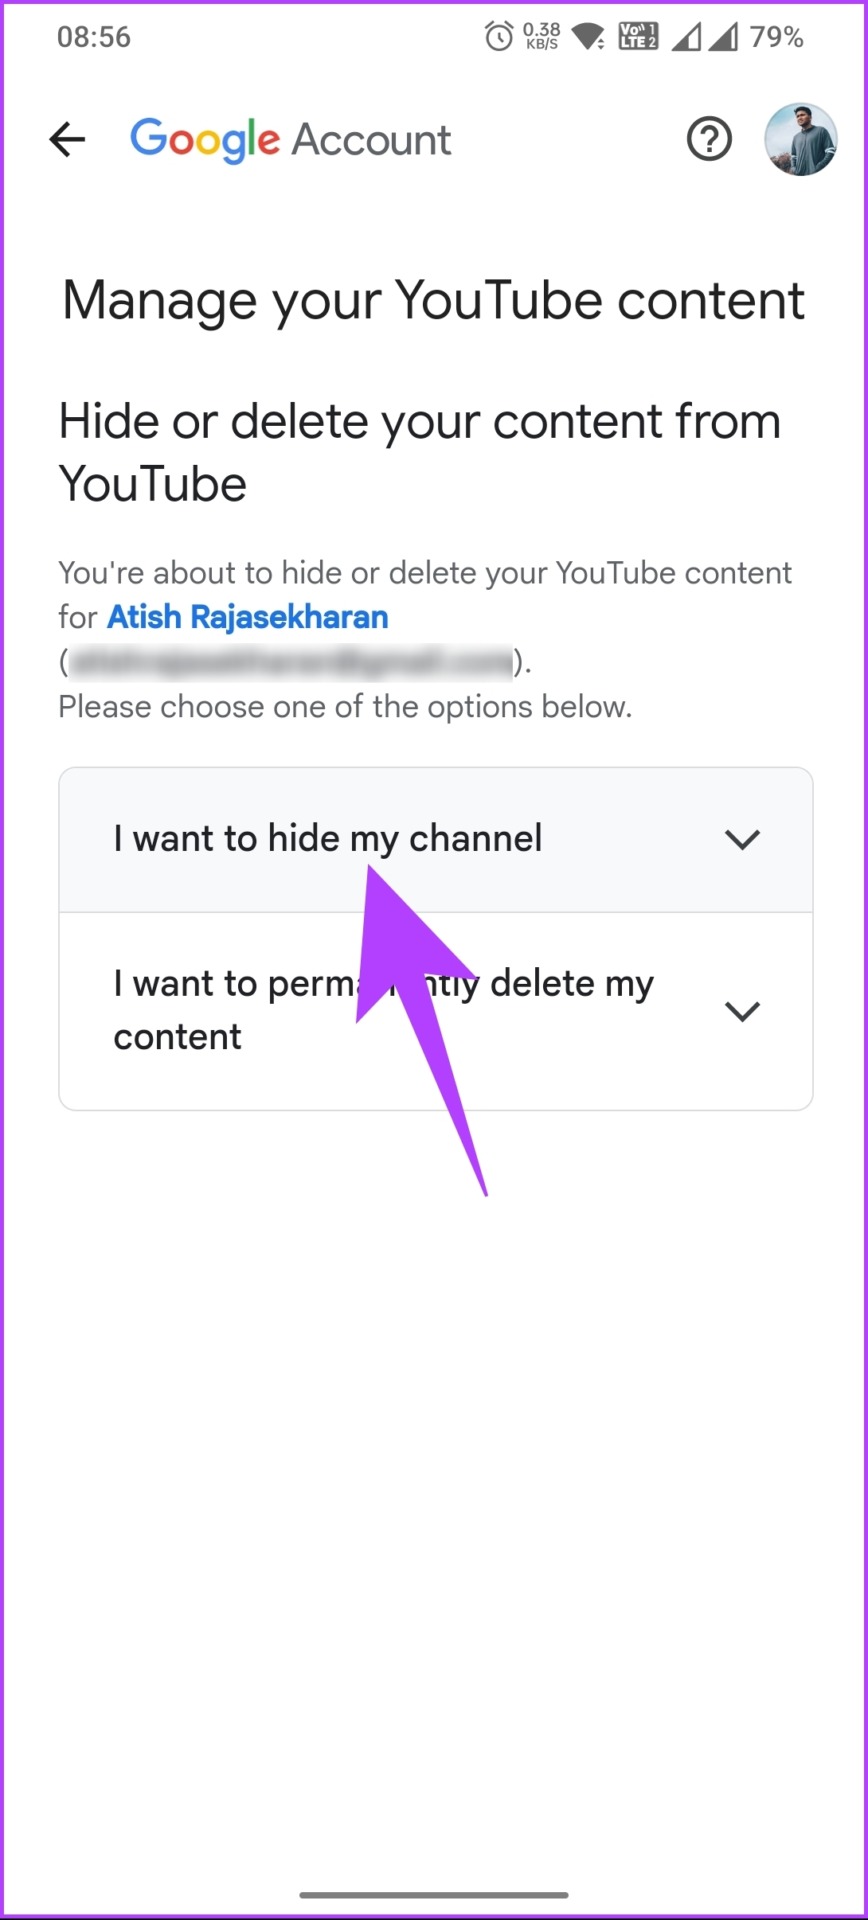 select 'I want to hide my channel'